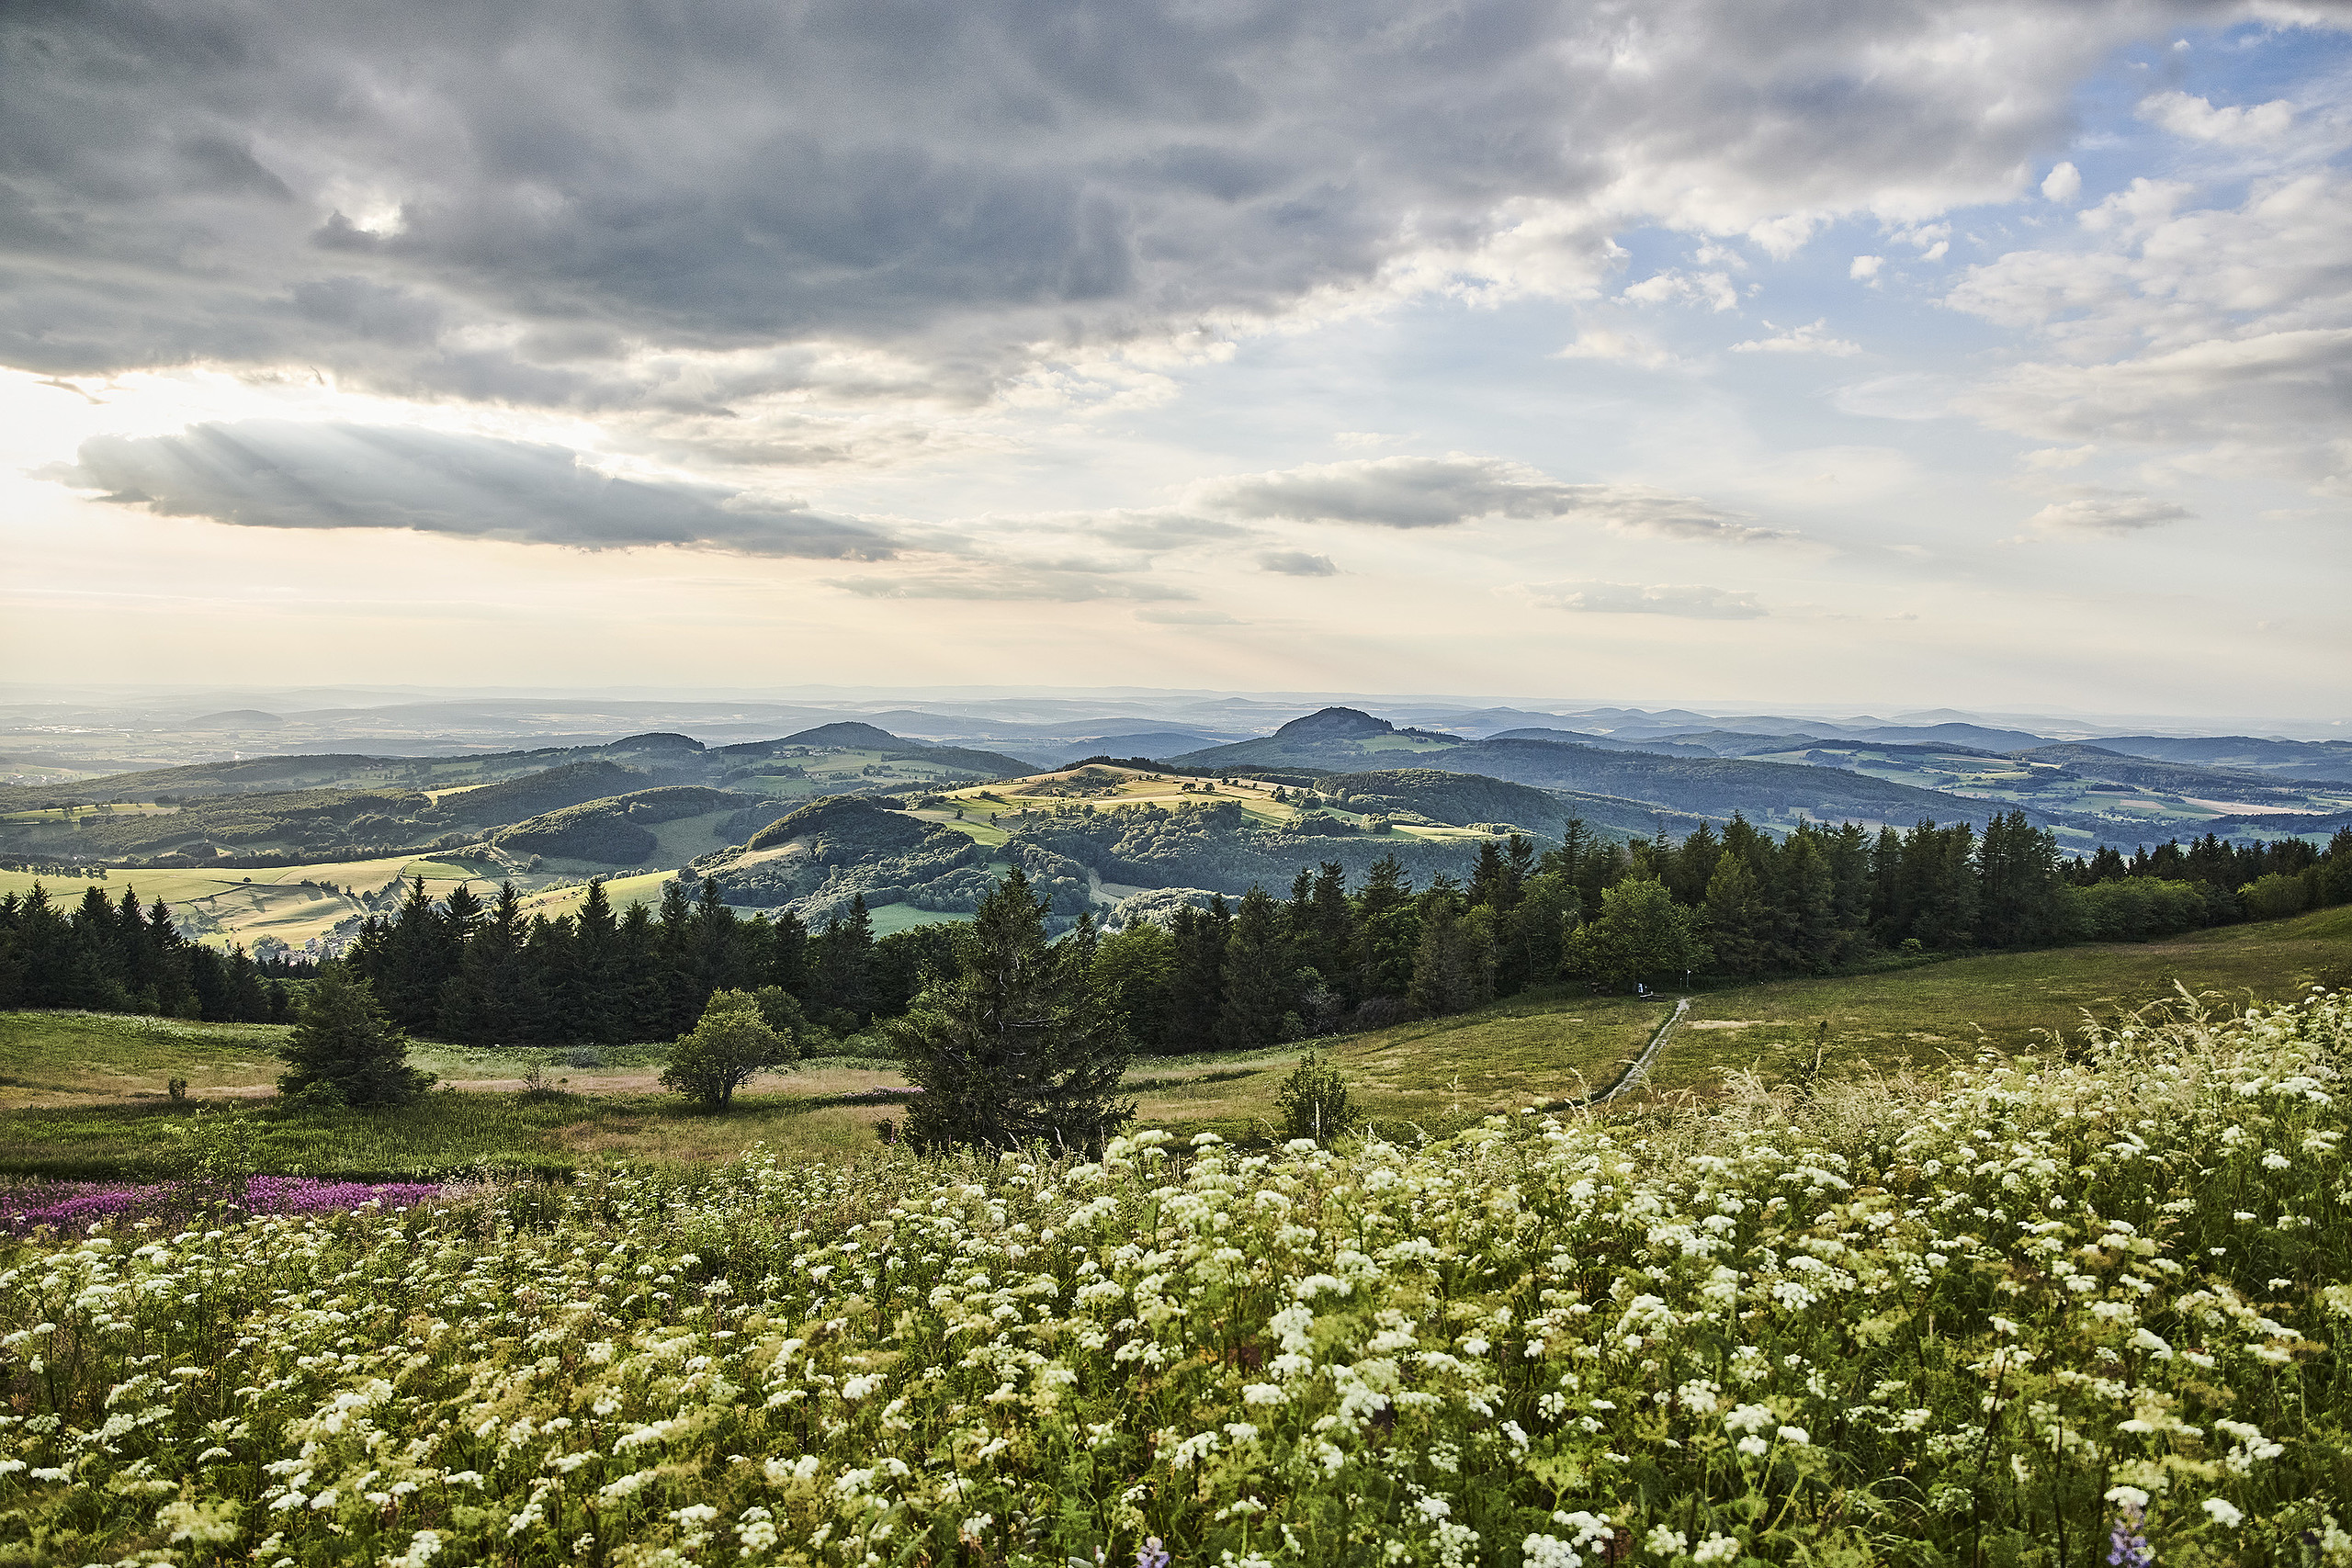 [Translate to English:] Panoramic view of fields and low mountains in the Rhön